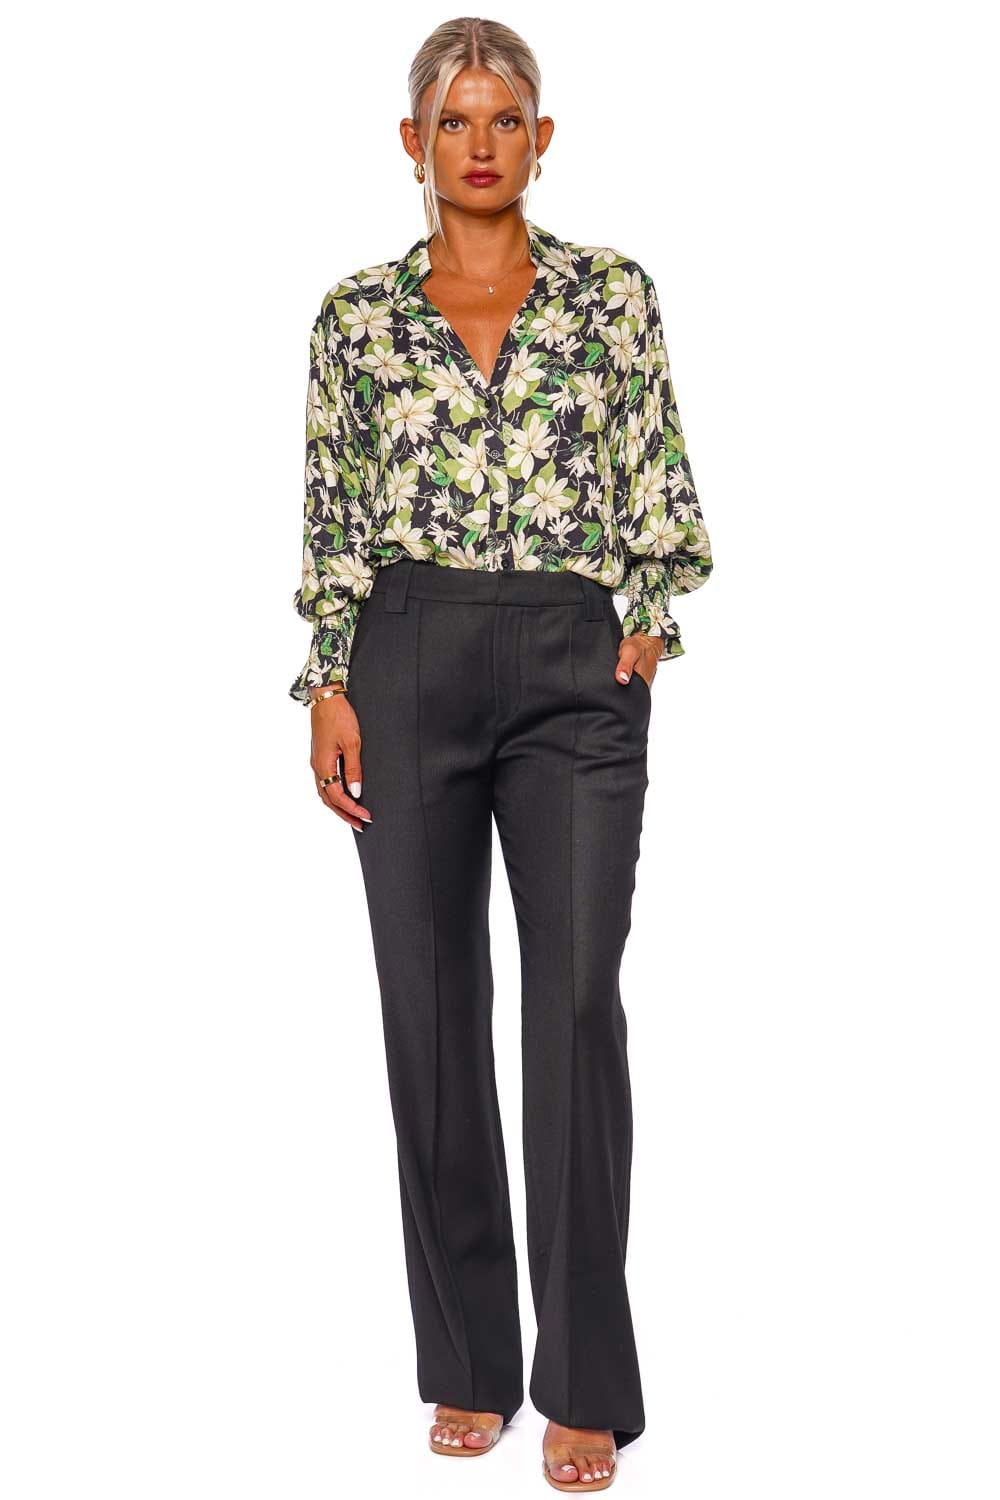 A.L.C. Shelby Black Tailored Pant